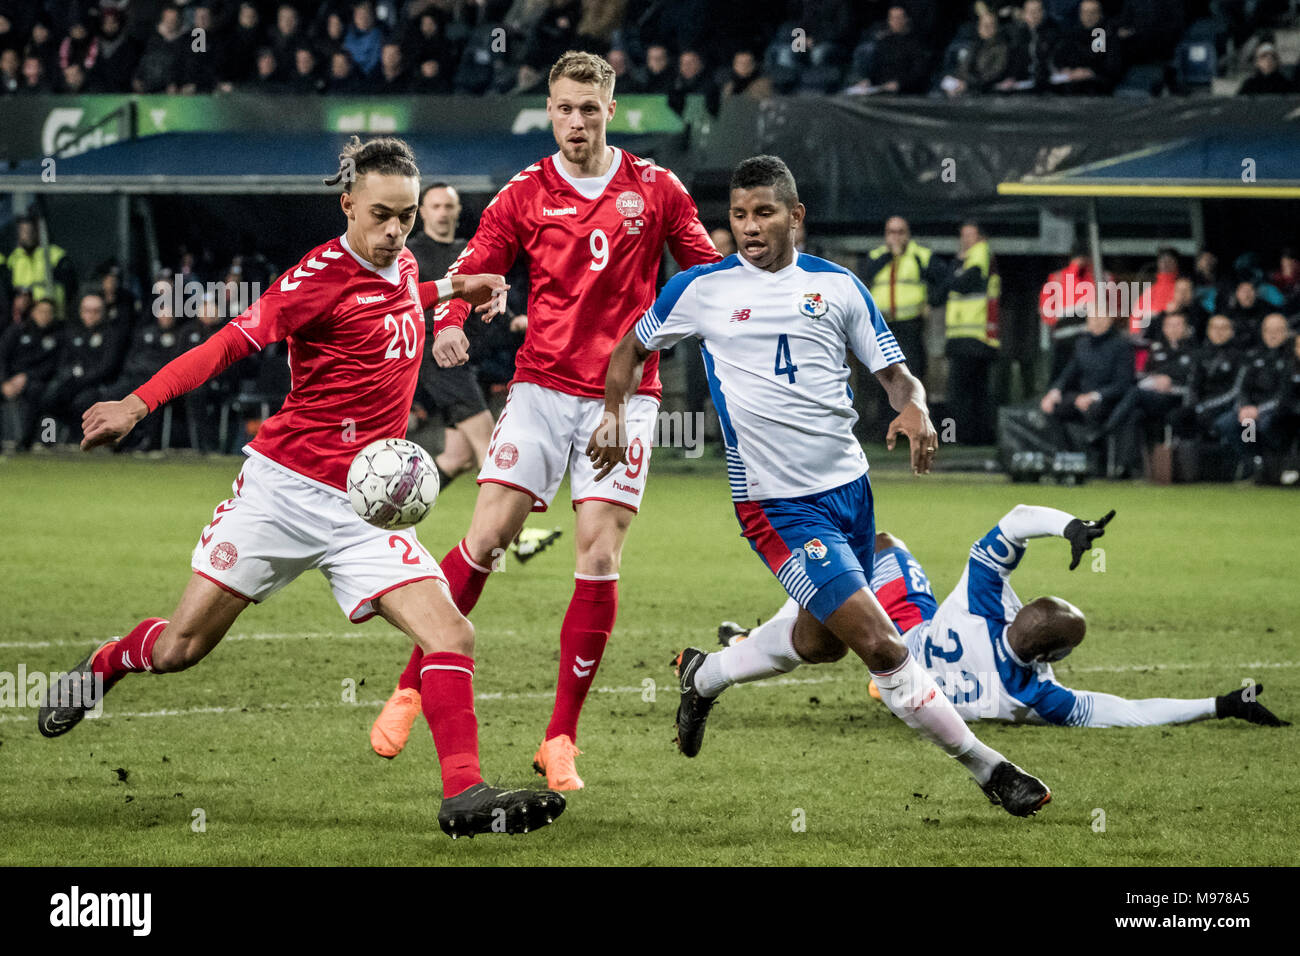 Denmark, Brøndby - March 22, 2018. Yussuf Poulsen (20) of Denmark and Fidel Escobar (4) of Panama seen during the football friendly between Denmark and Panama at Brøndby Stadion. (Photo credit: Gonzales Photo - Kim M. Leland). Credit: Gonzales Photo/Alamy Live News Stock Photo